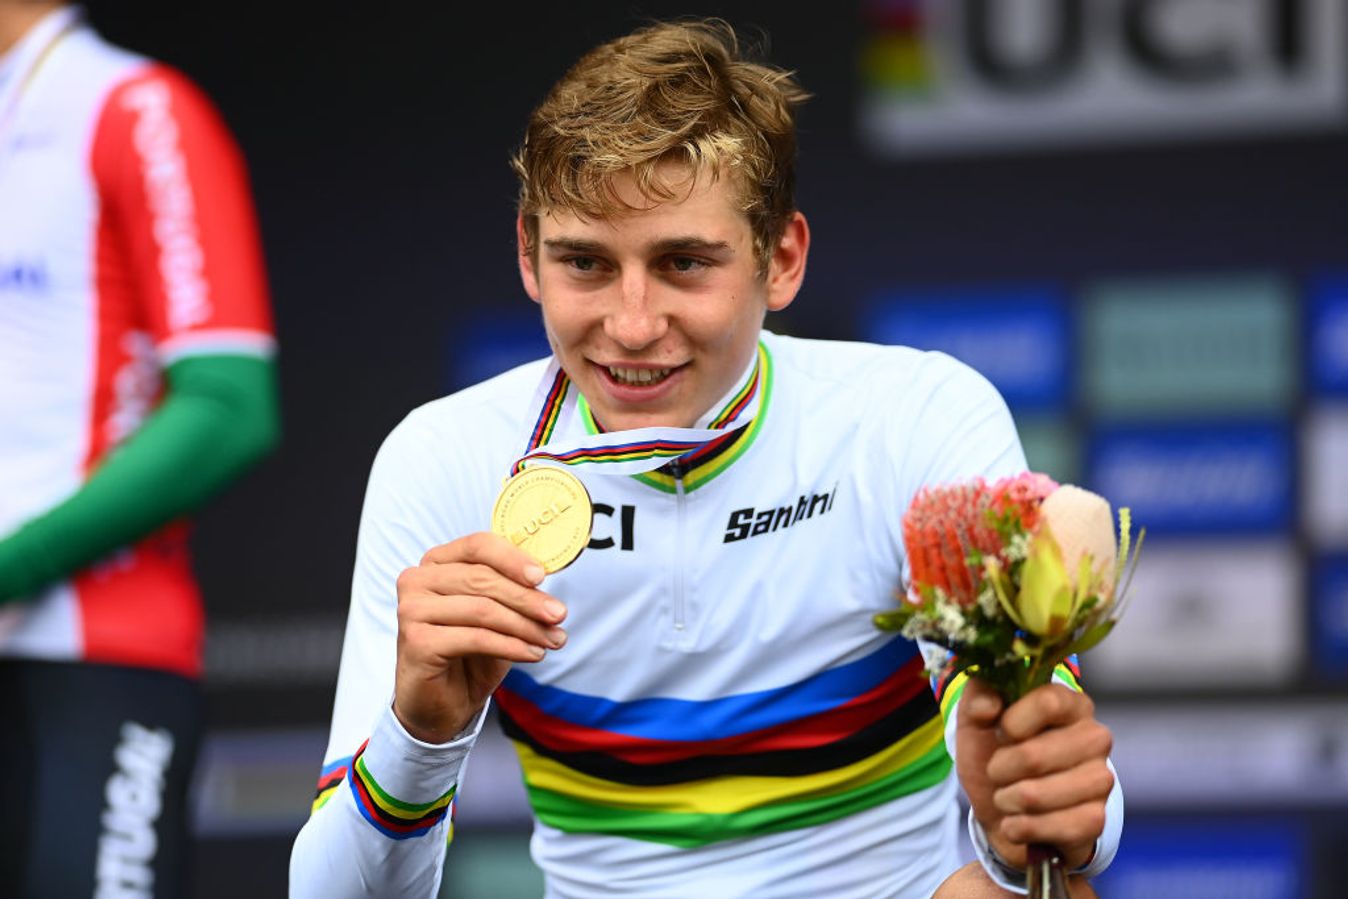 Emil Herzog became junior world champion in 2022 before signing for Bora-Hansgrohe